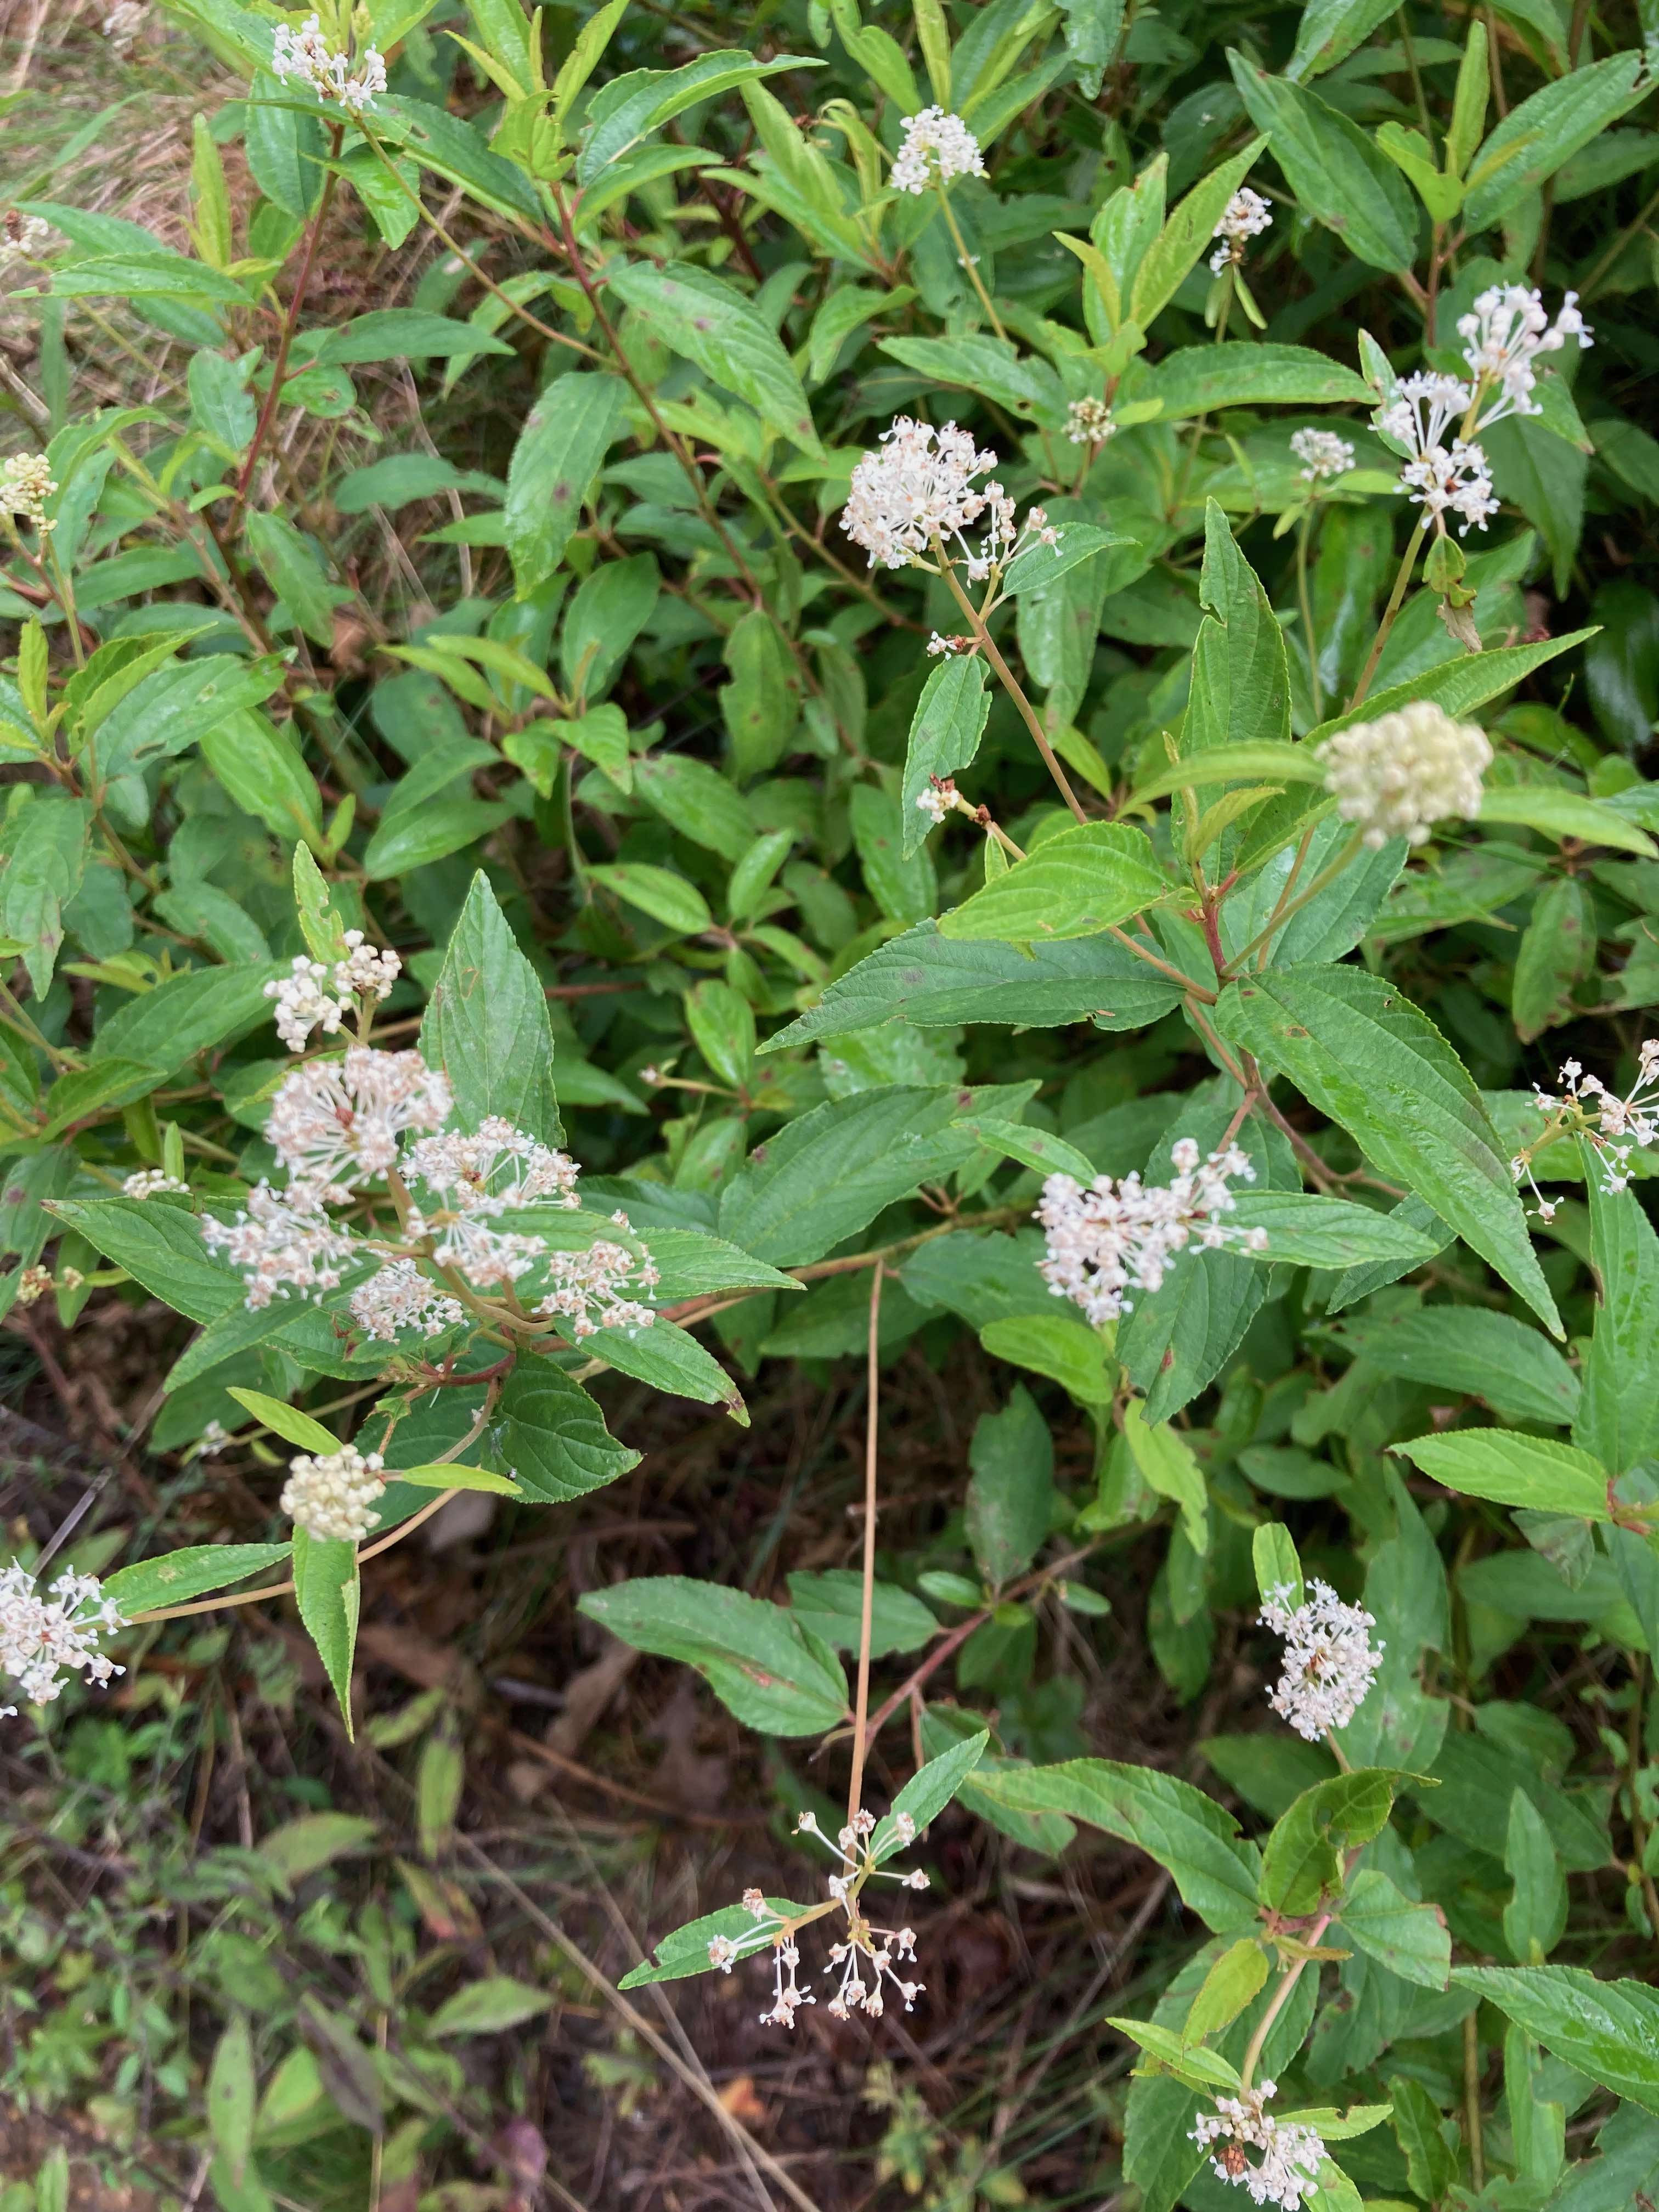 The Scientific Name is Ceanothus americanus. You will likely hear them called New Jersey Tea. This picture shows the Small shrub with attractive white inflorescences on the branch tips. of Ceanothus americanus